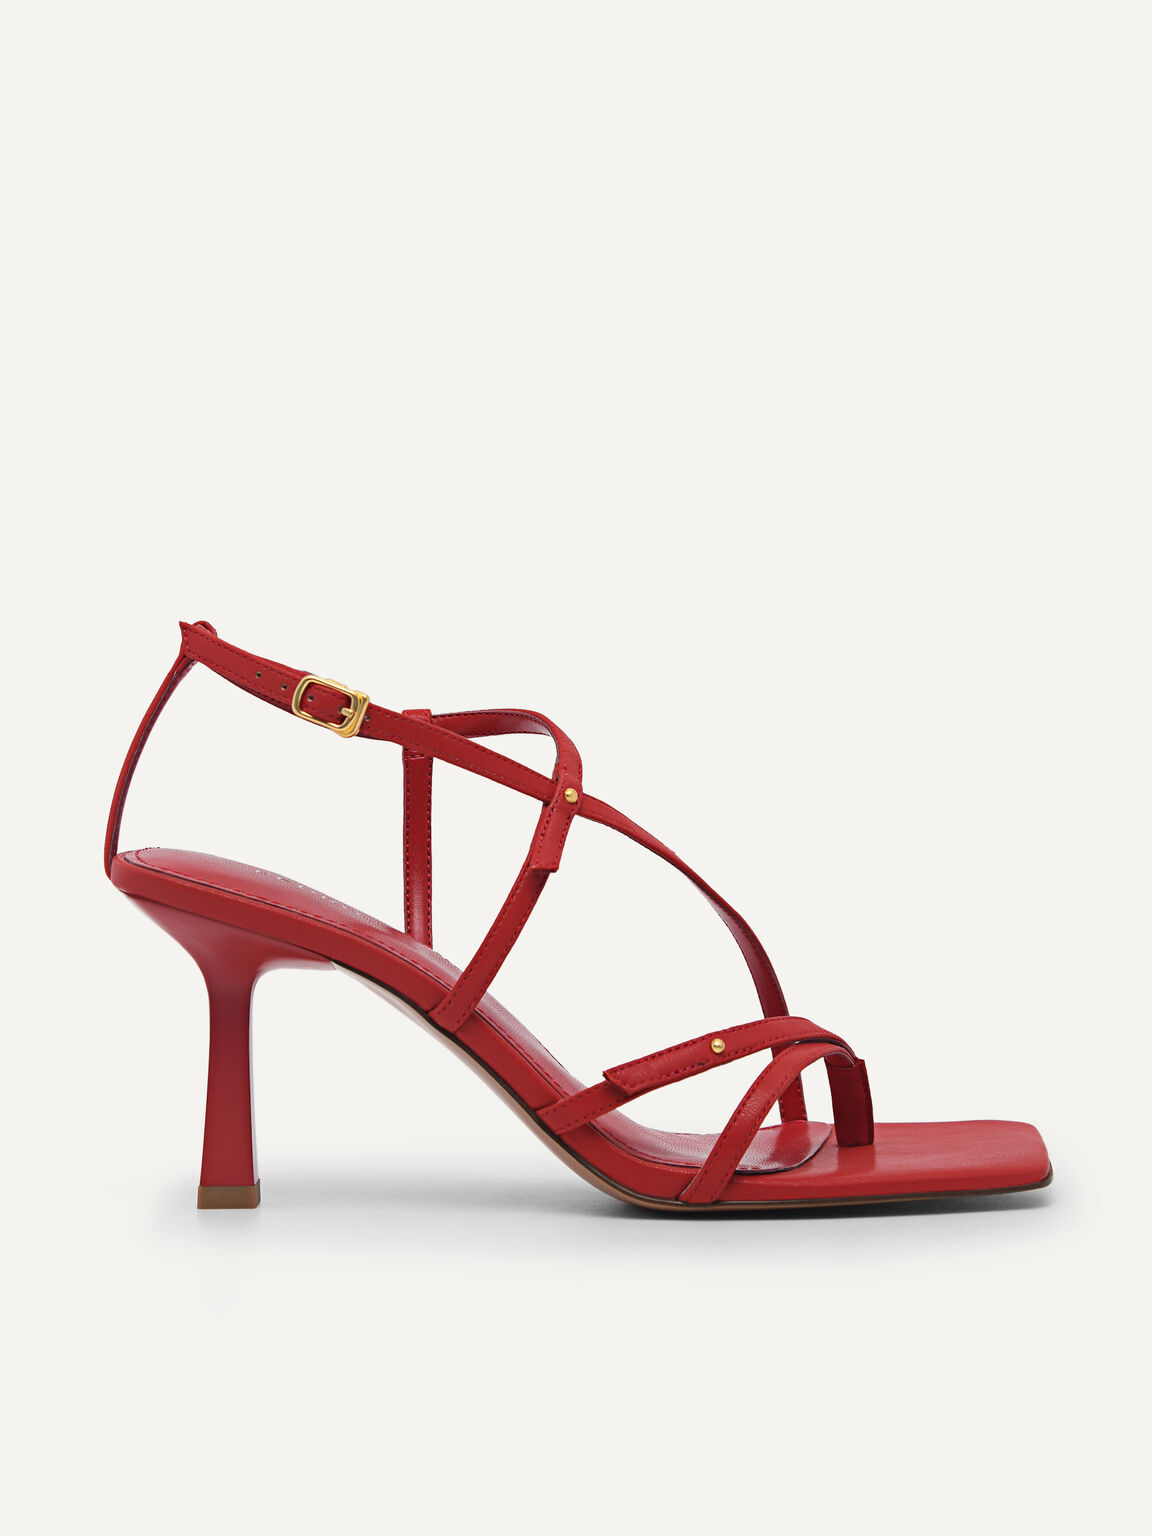 Strappy Heeled Sandals, Red